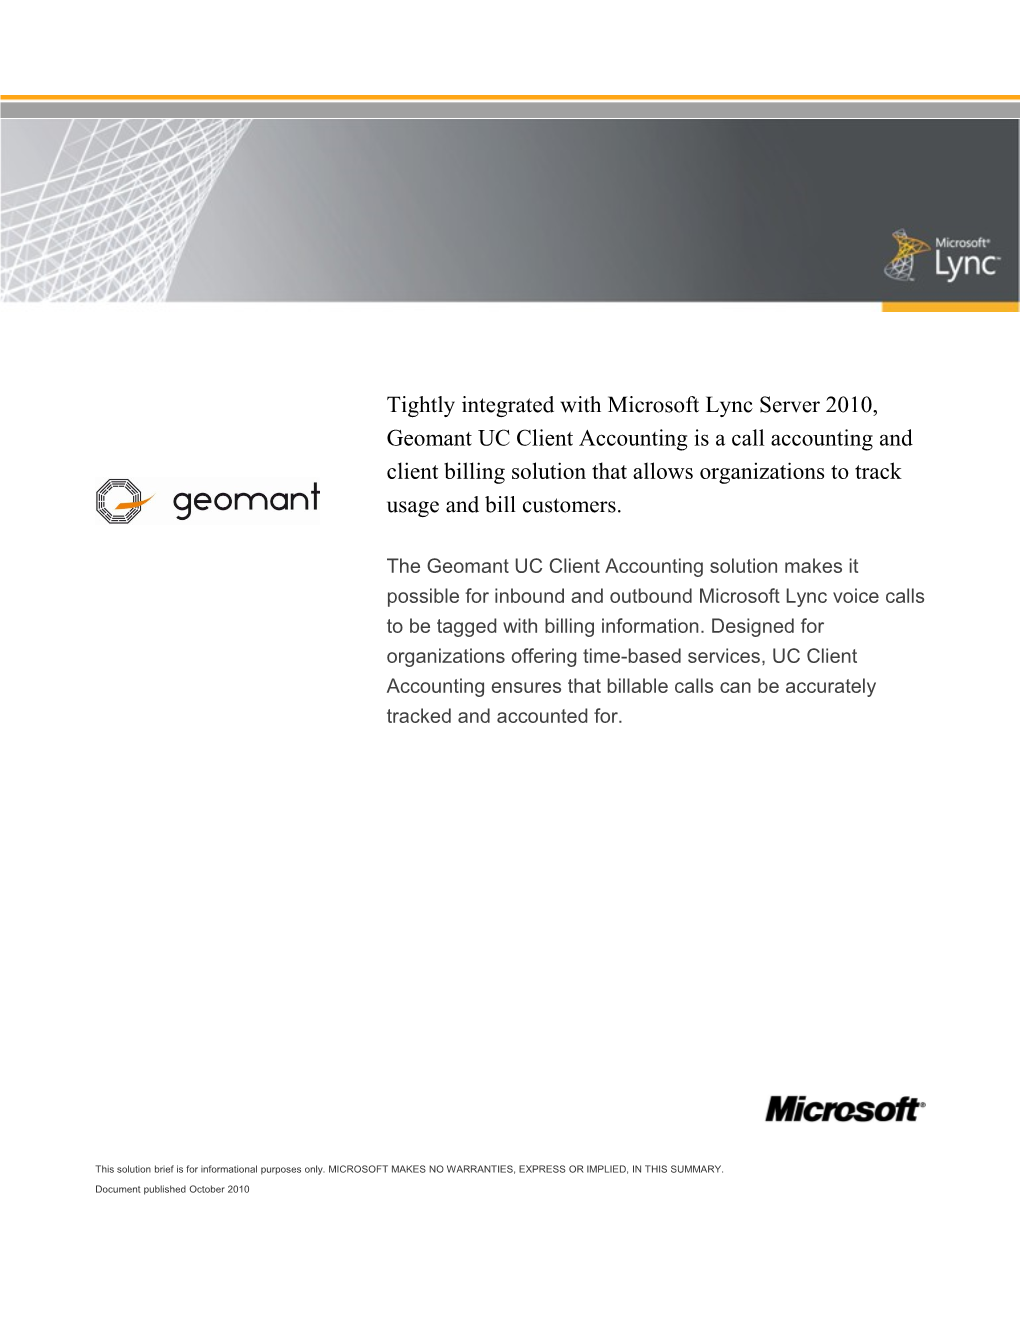 Tightly Integrated with Microsoft Lync Server 2010, Geomant UC Client Accounting Is a Call